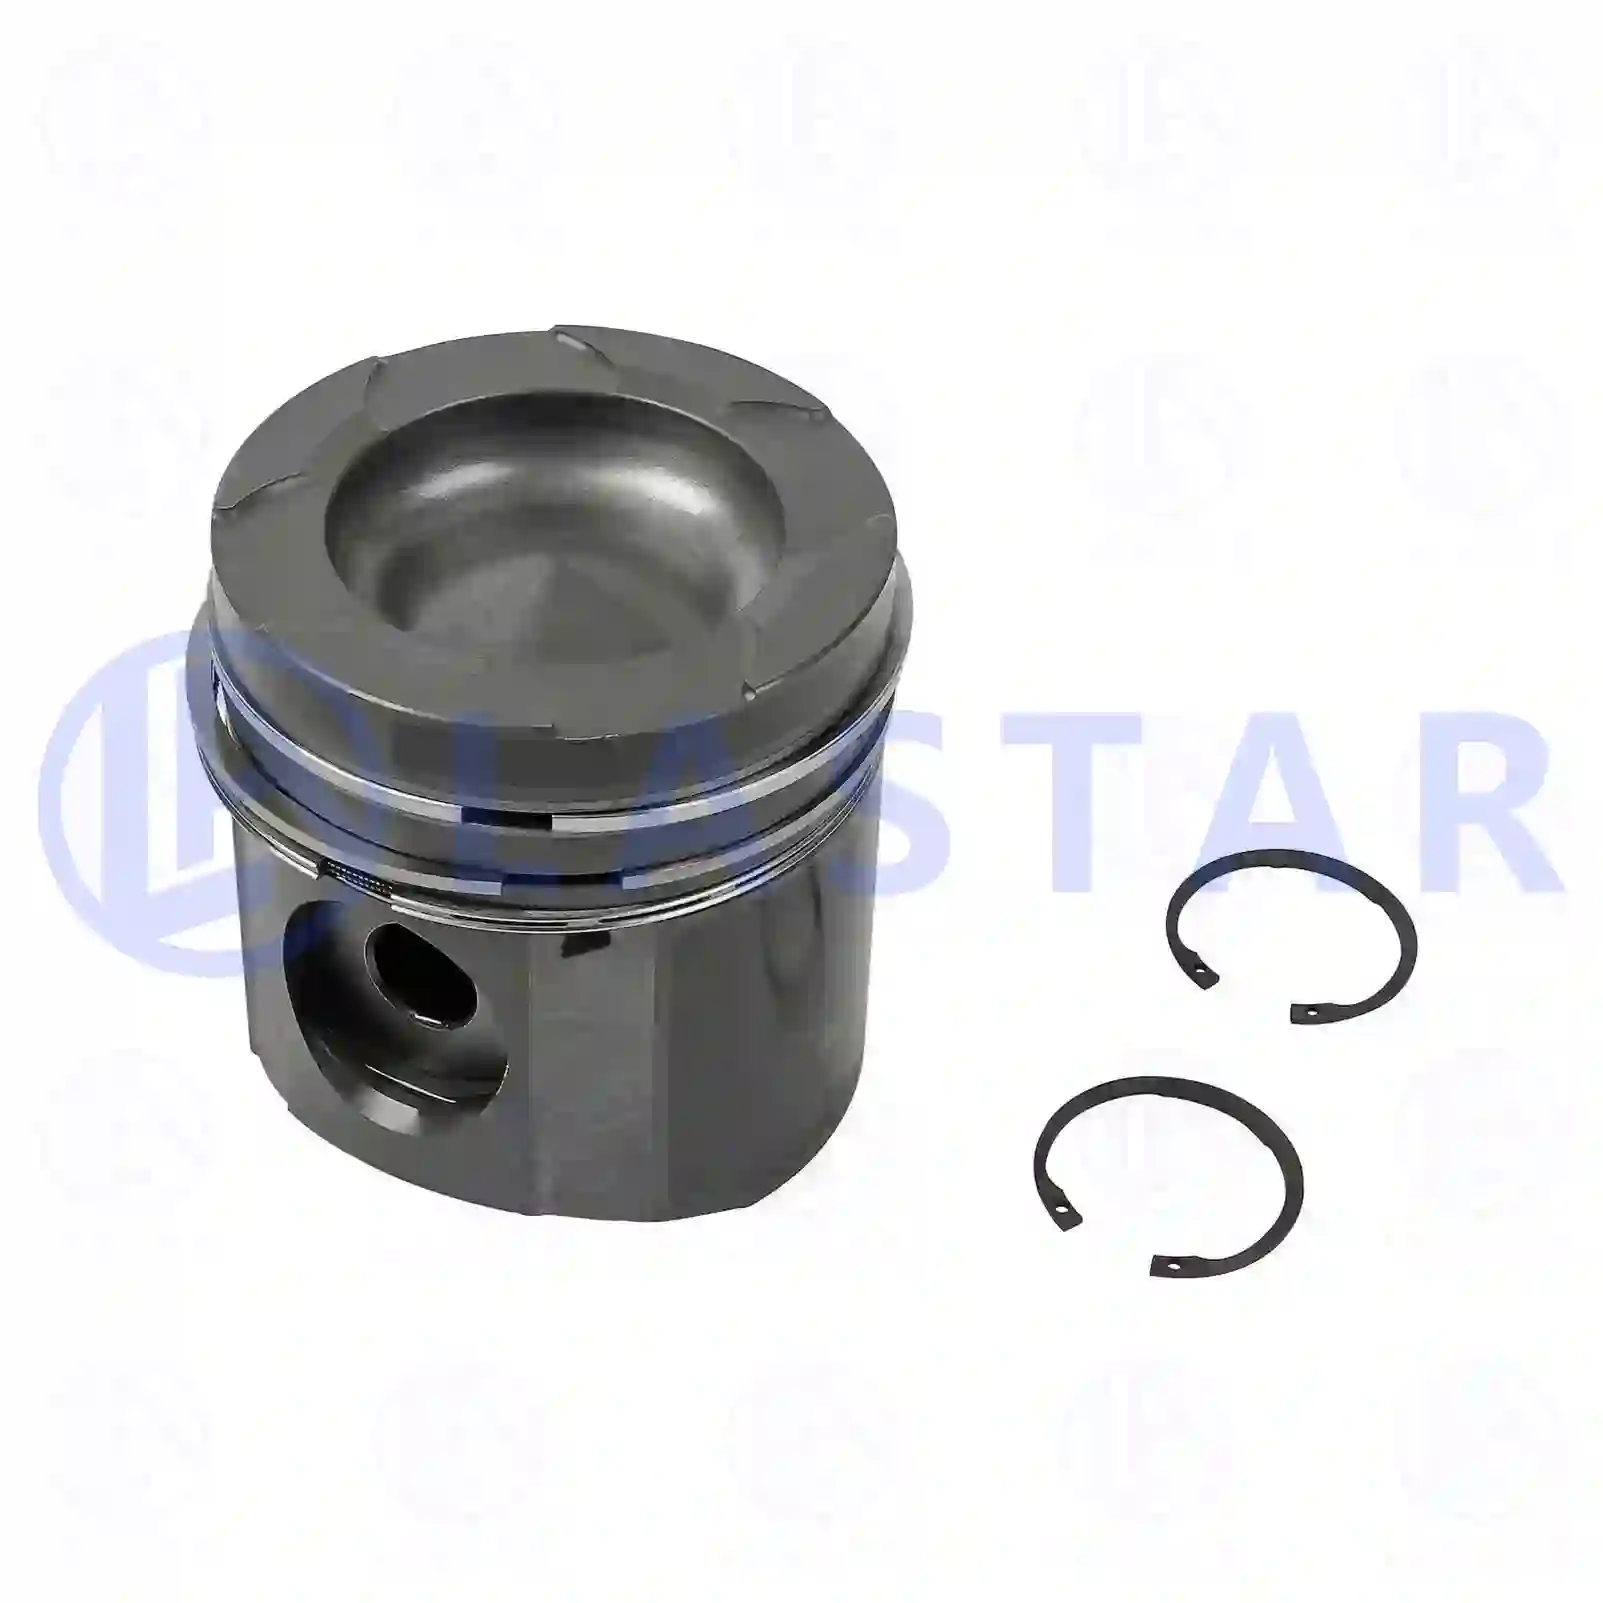 Piston, complete with rings, 77701527, 51025016064, 51025016080, 51025020104, 51025110479, 51025116080 ||  77701527 Lastar Spare Part | Truck Spare Parts, Auotomotive Spare Parts Piston, complete with rings, 77701527, 51025016064, 51025016080, 51025020104, 51025110479, 51025116080 ||  77701527 Lastar Spare Part | Truck Spare Parts, Auotomotive Spare Parts